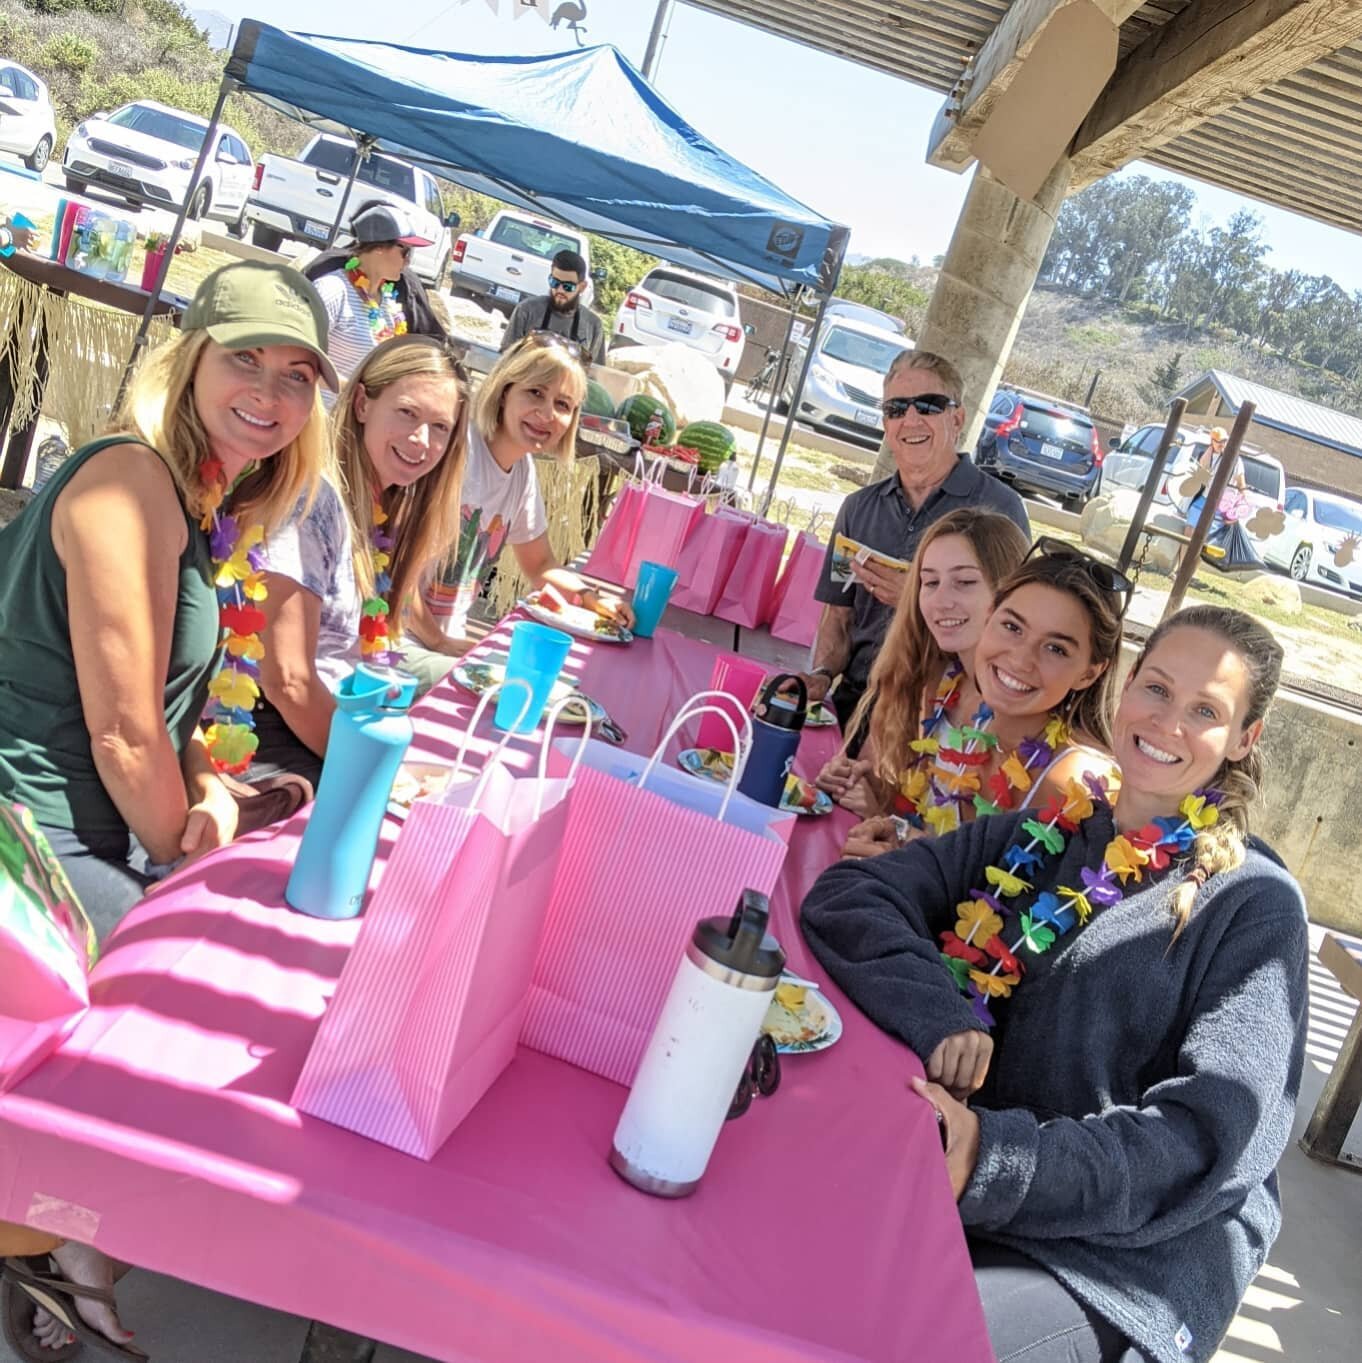 Hugs all around in the 805!
Salt Water Divas welcome back party was  complete with Divas, tacos, live music, swag bags, surfing and so much fun! #surfgirls #waves #women #party #beachbash #friends #food #picnic #somuchfun #nomaskrequired